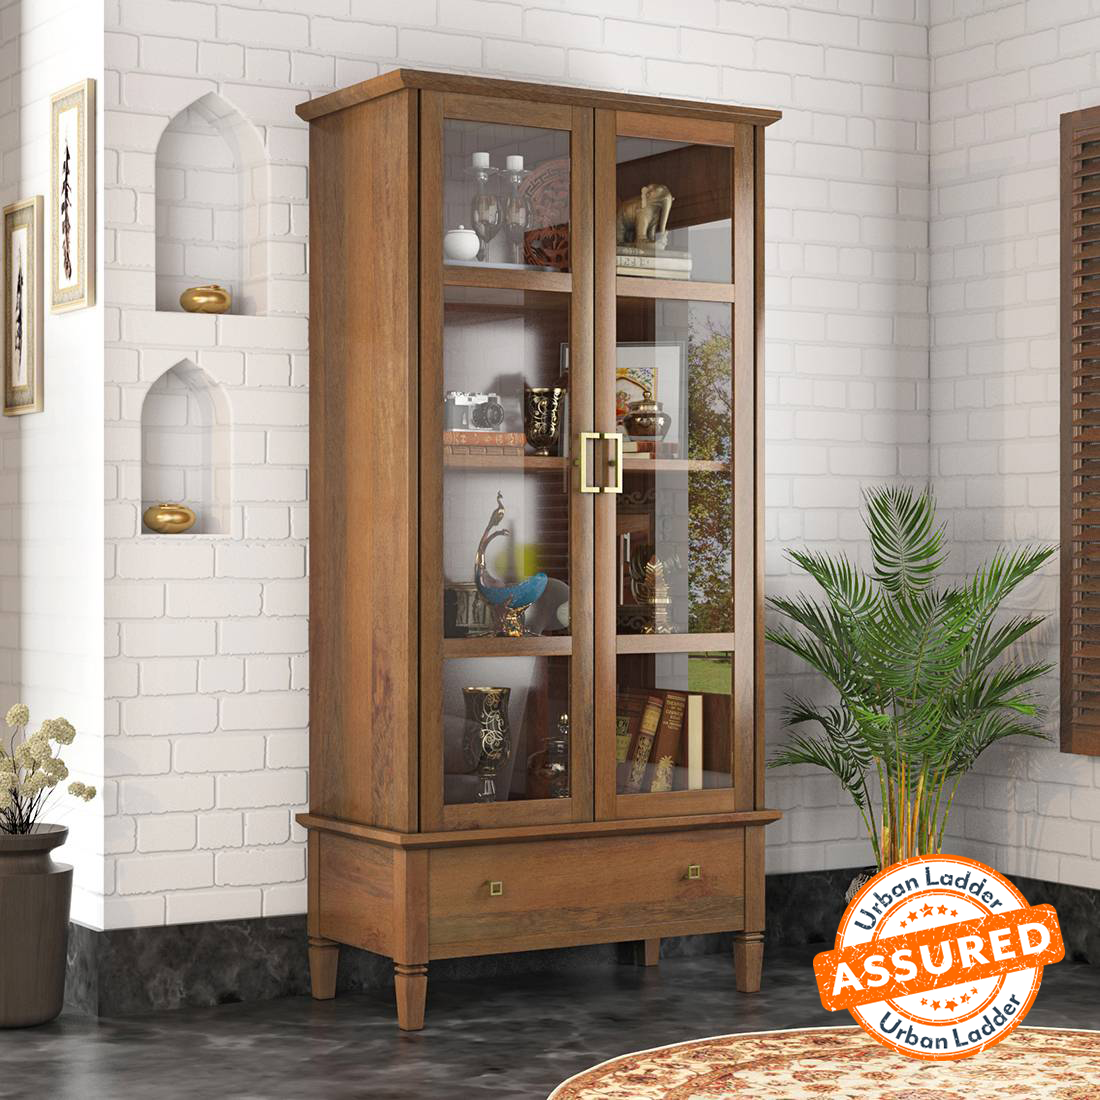 Up to 70% off on Showcases | Full House Sale - Urban Ladder